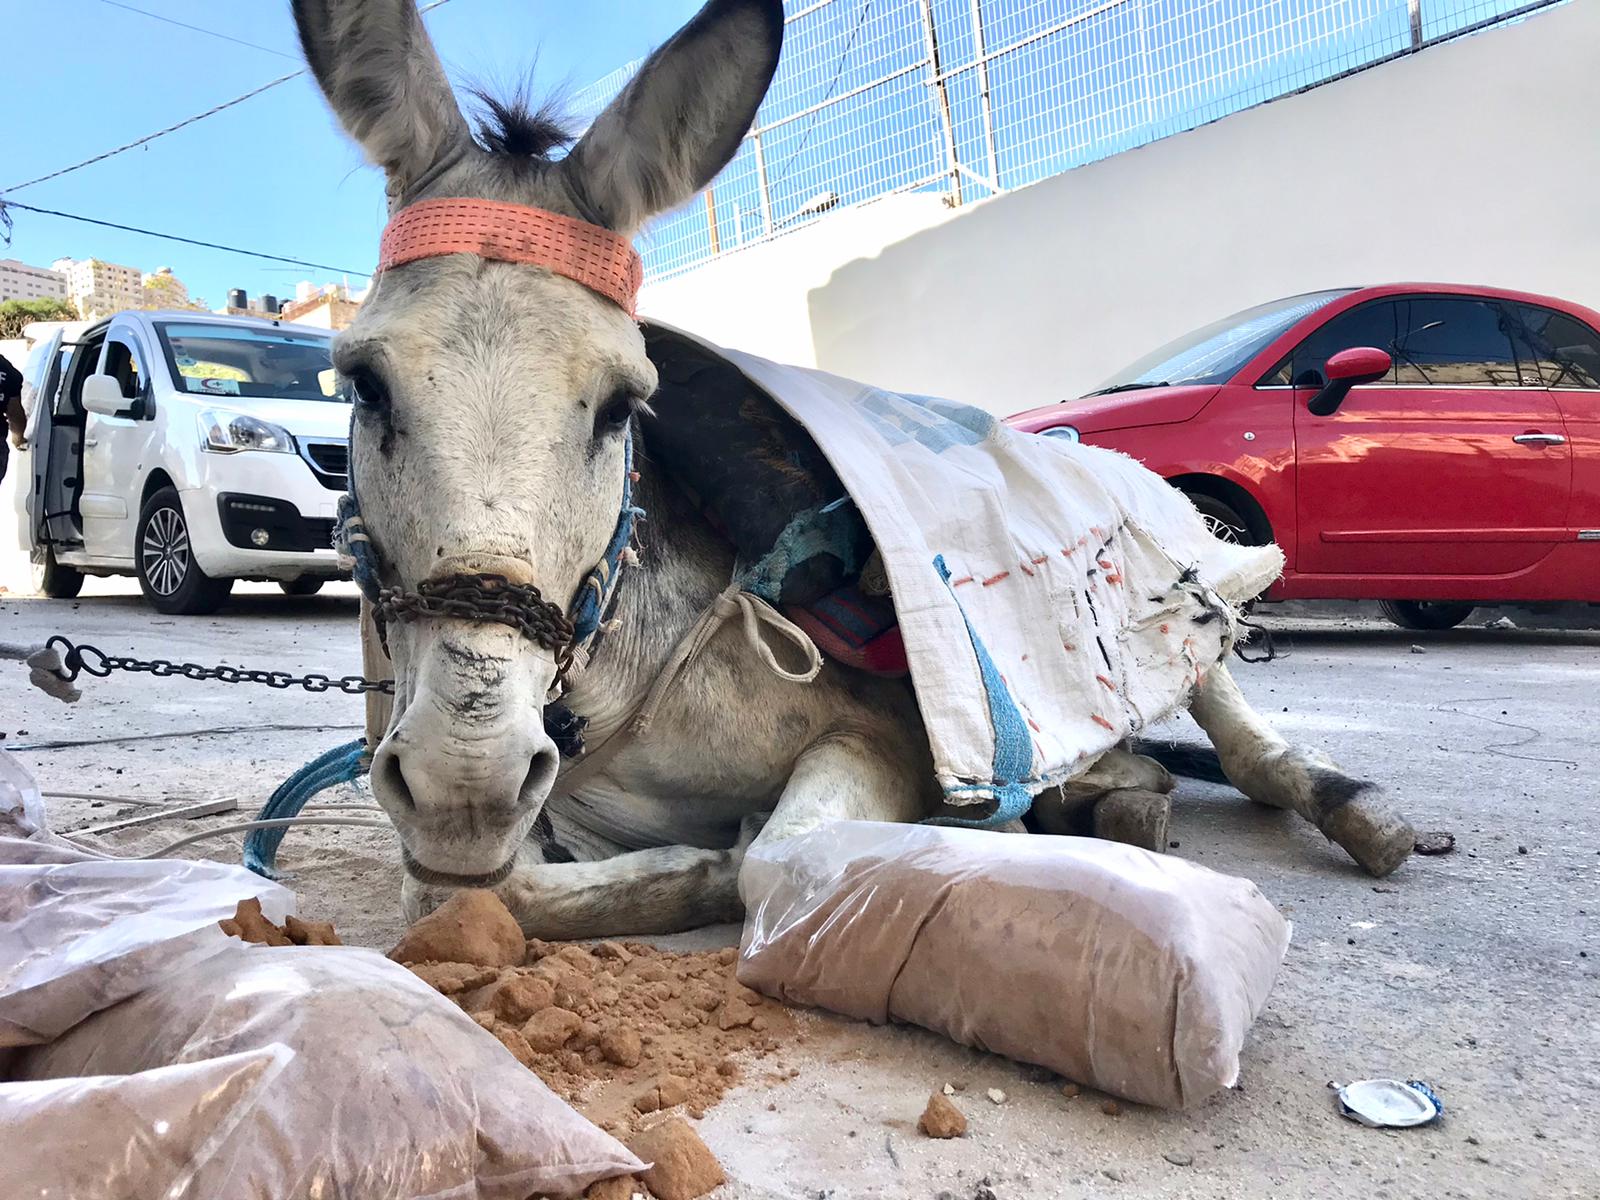 Builder donkey lying down on the ground - exhausted, defeated, depressed.